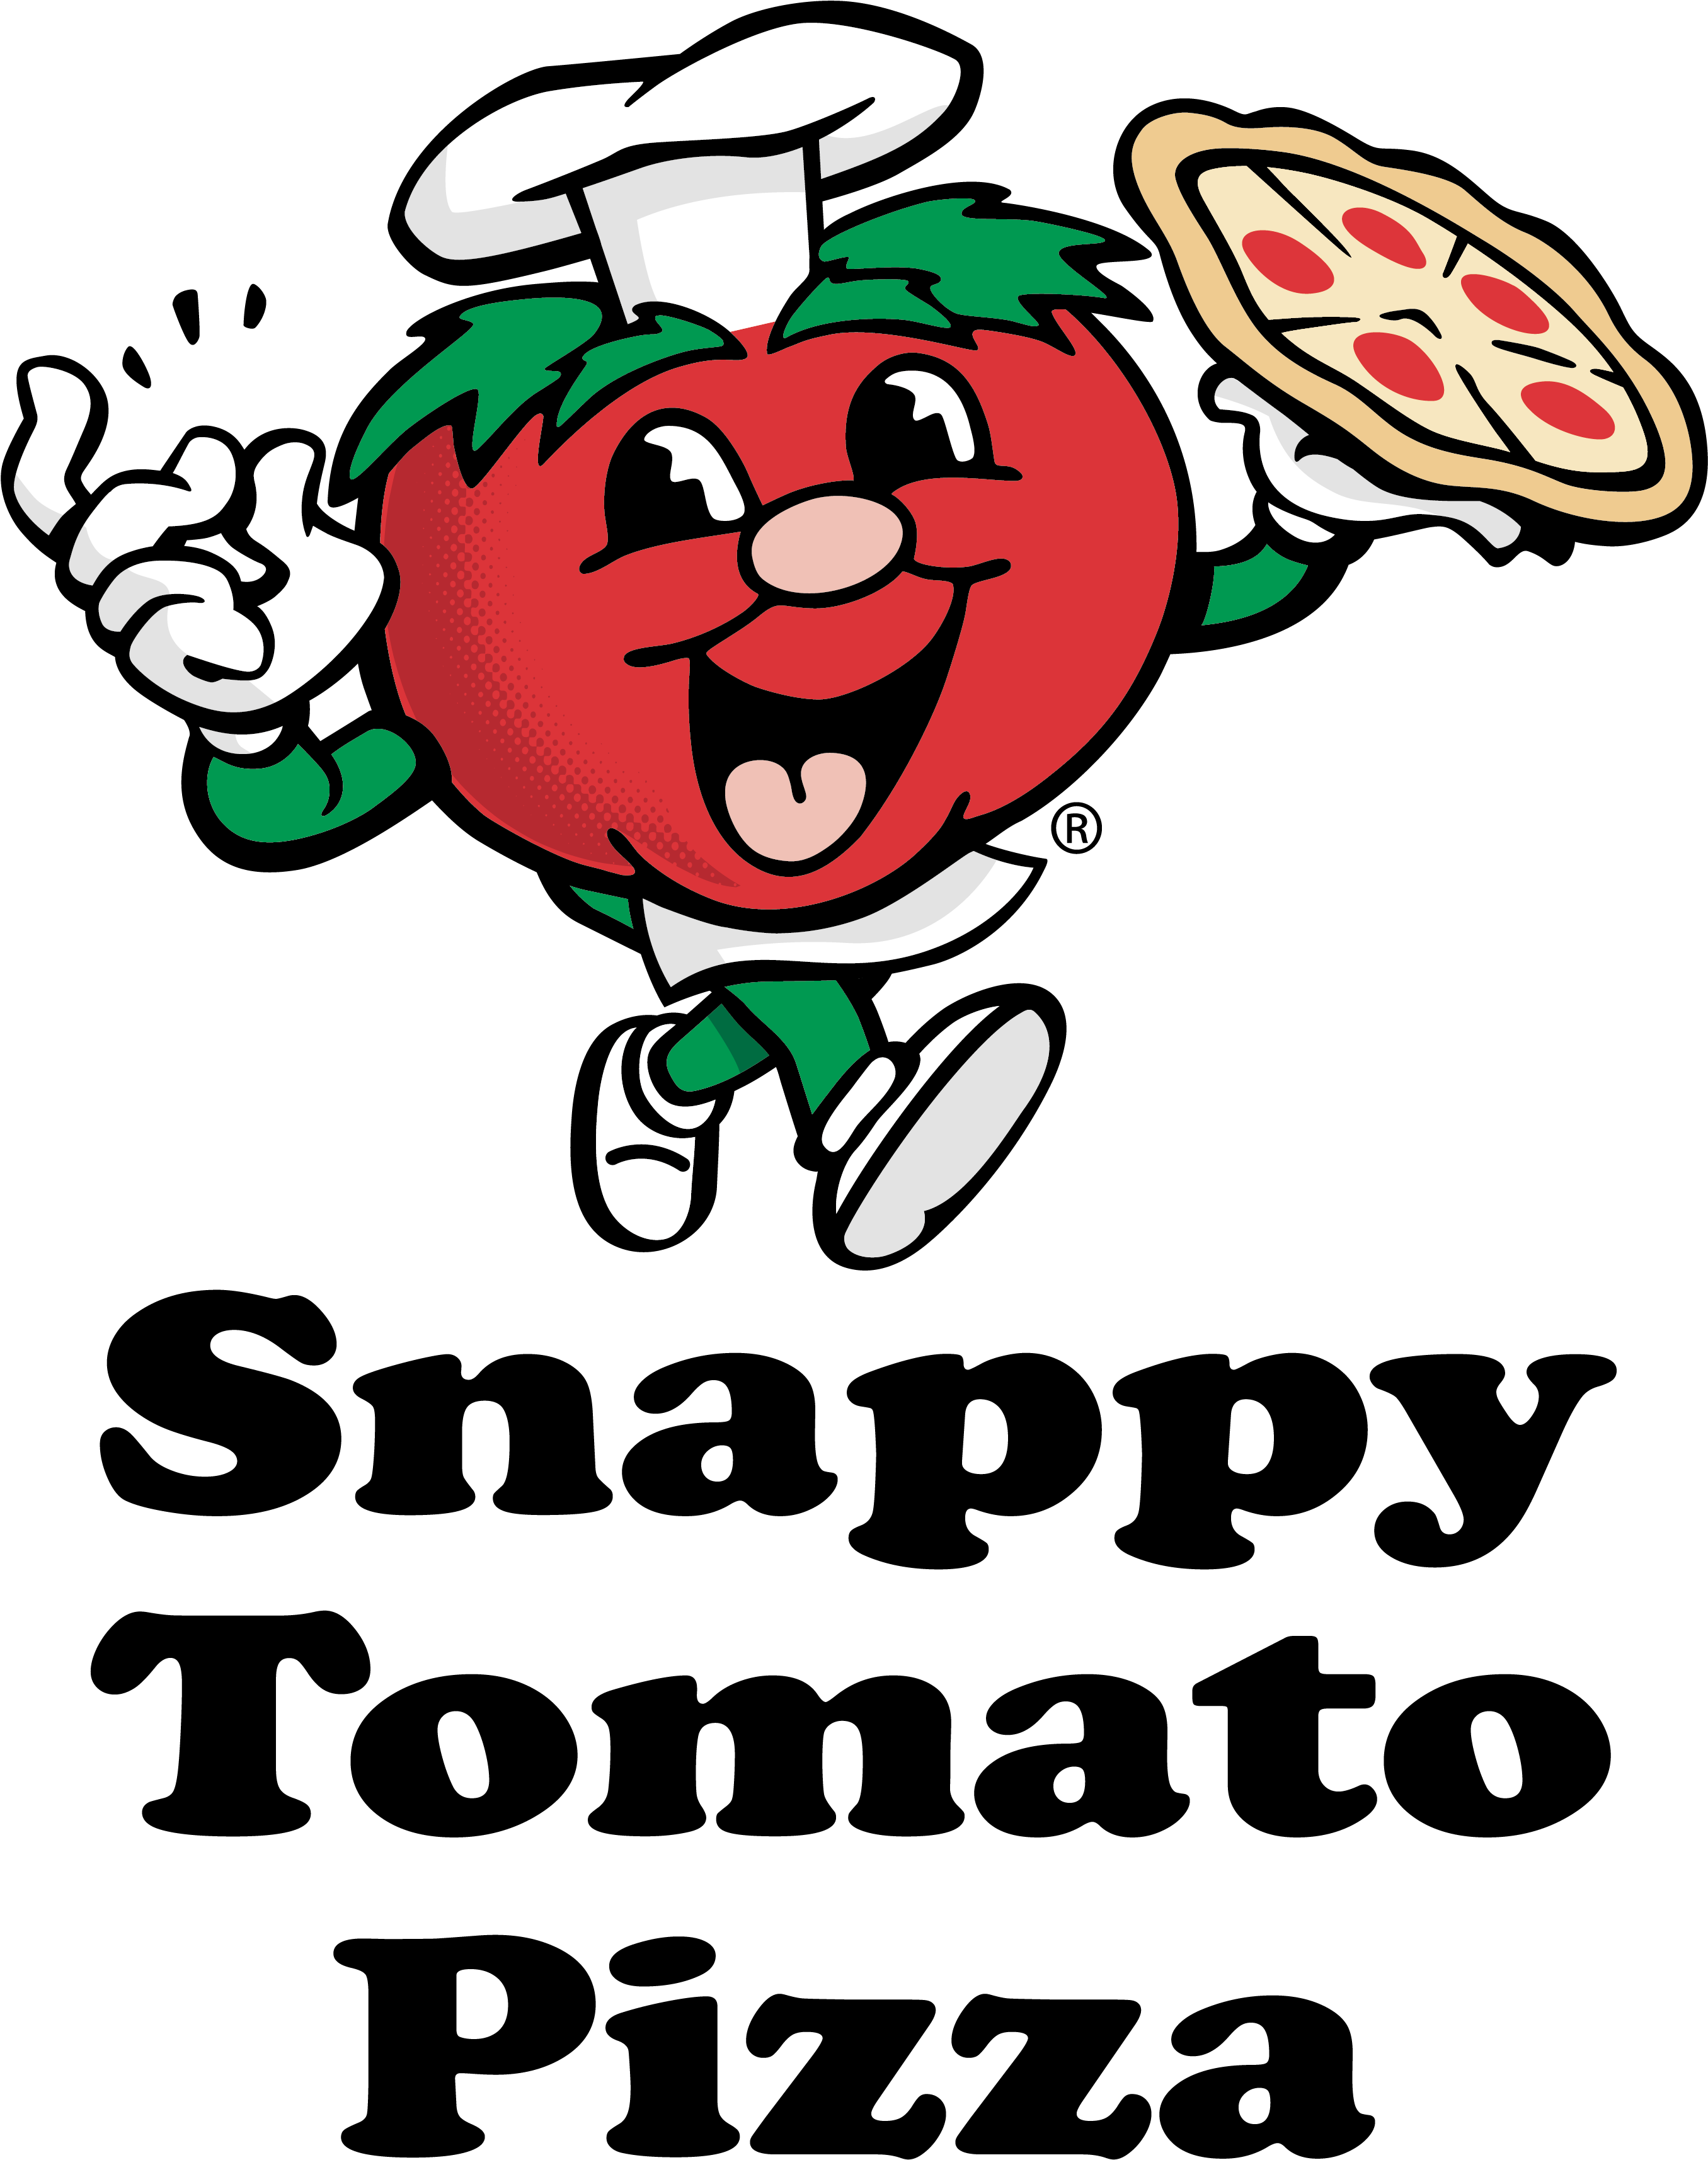 Snappy Tomato Pizza In Seaman Is Hiring 3 Part-time - Snappy Tomato Pizza Logo (3600x3600)